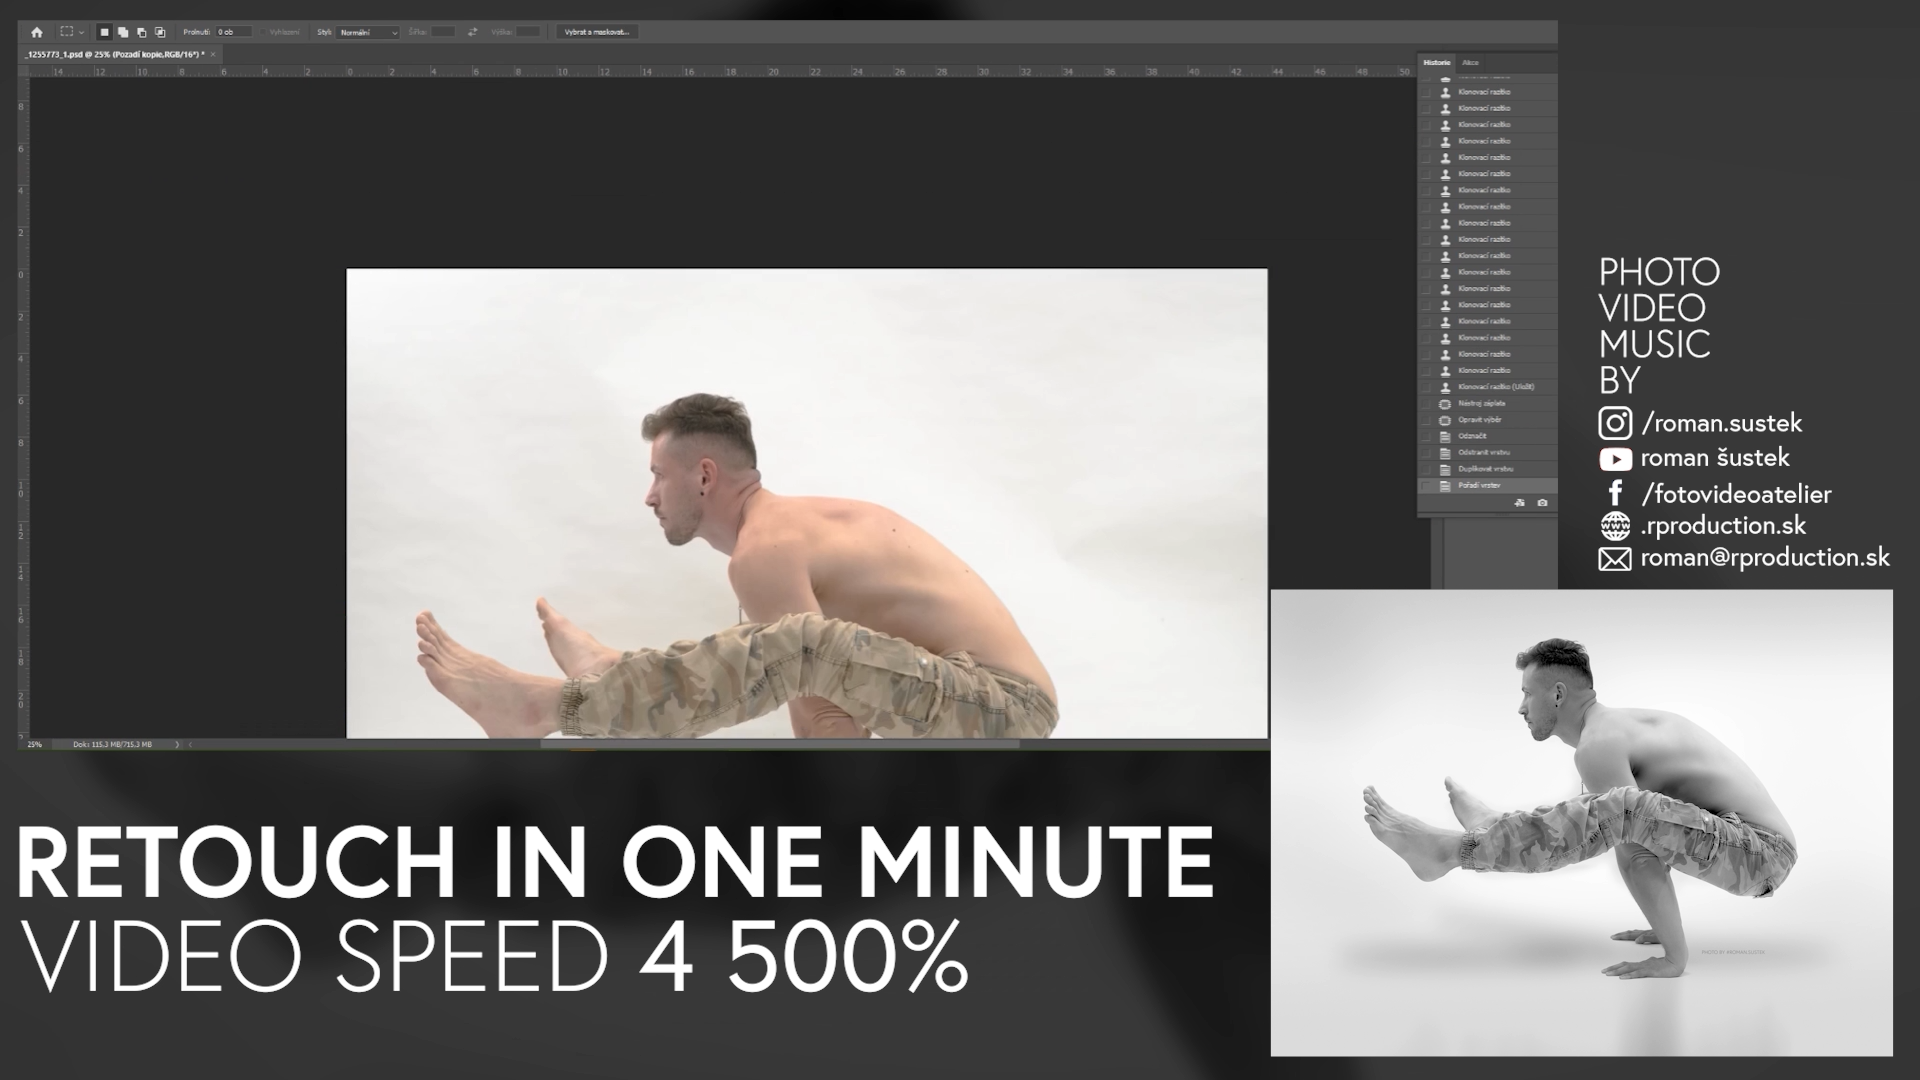 bw retouch photo with yoga instructor, 4 500% video speed, retouch in one minute